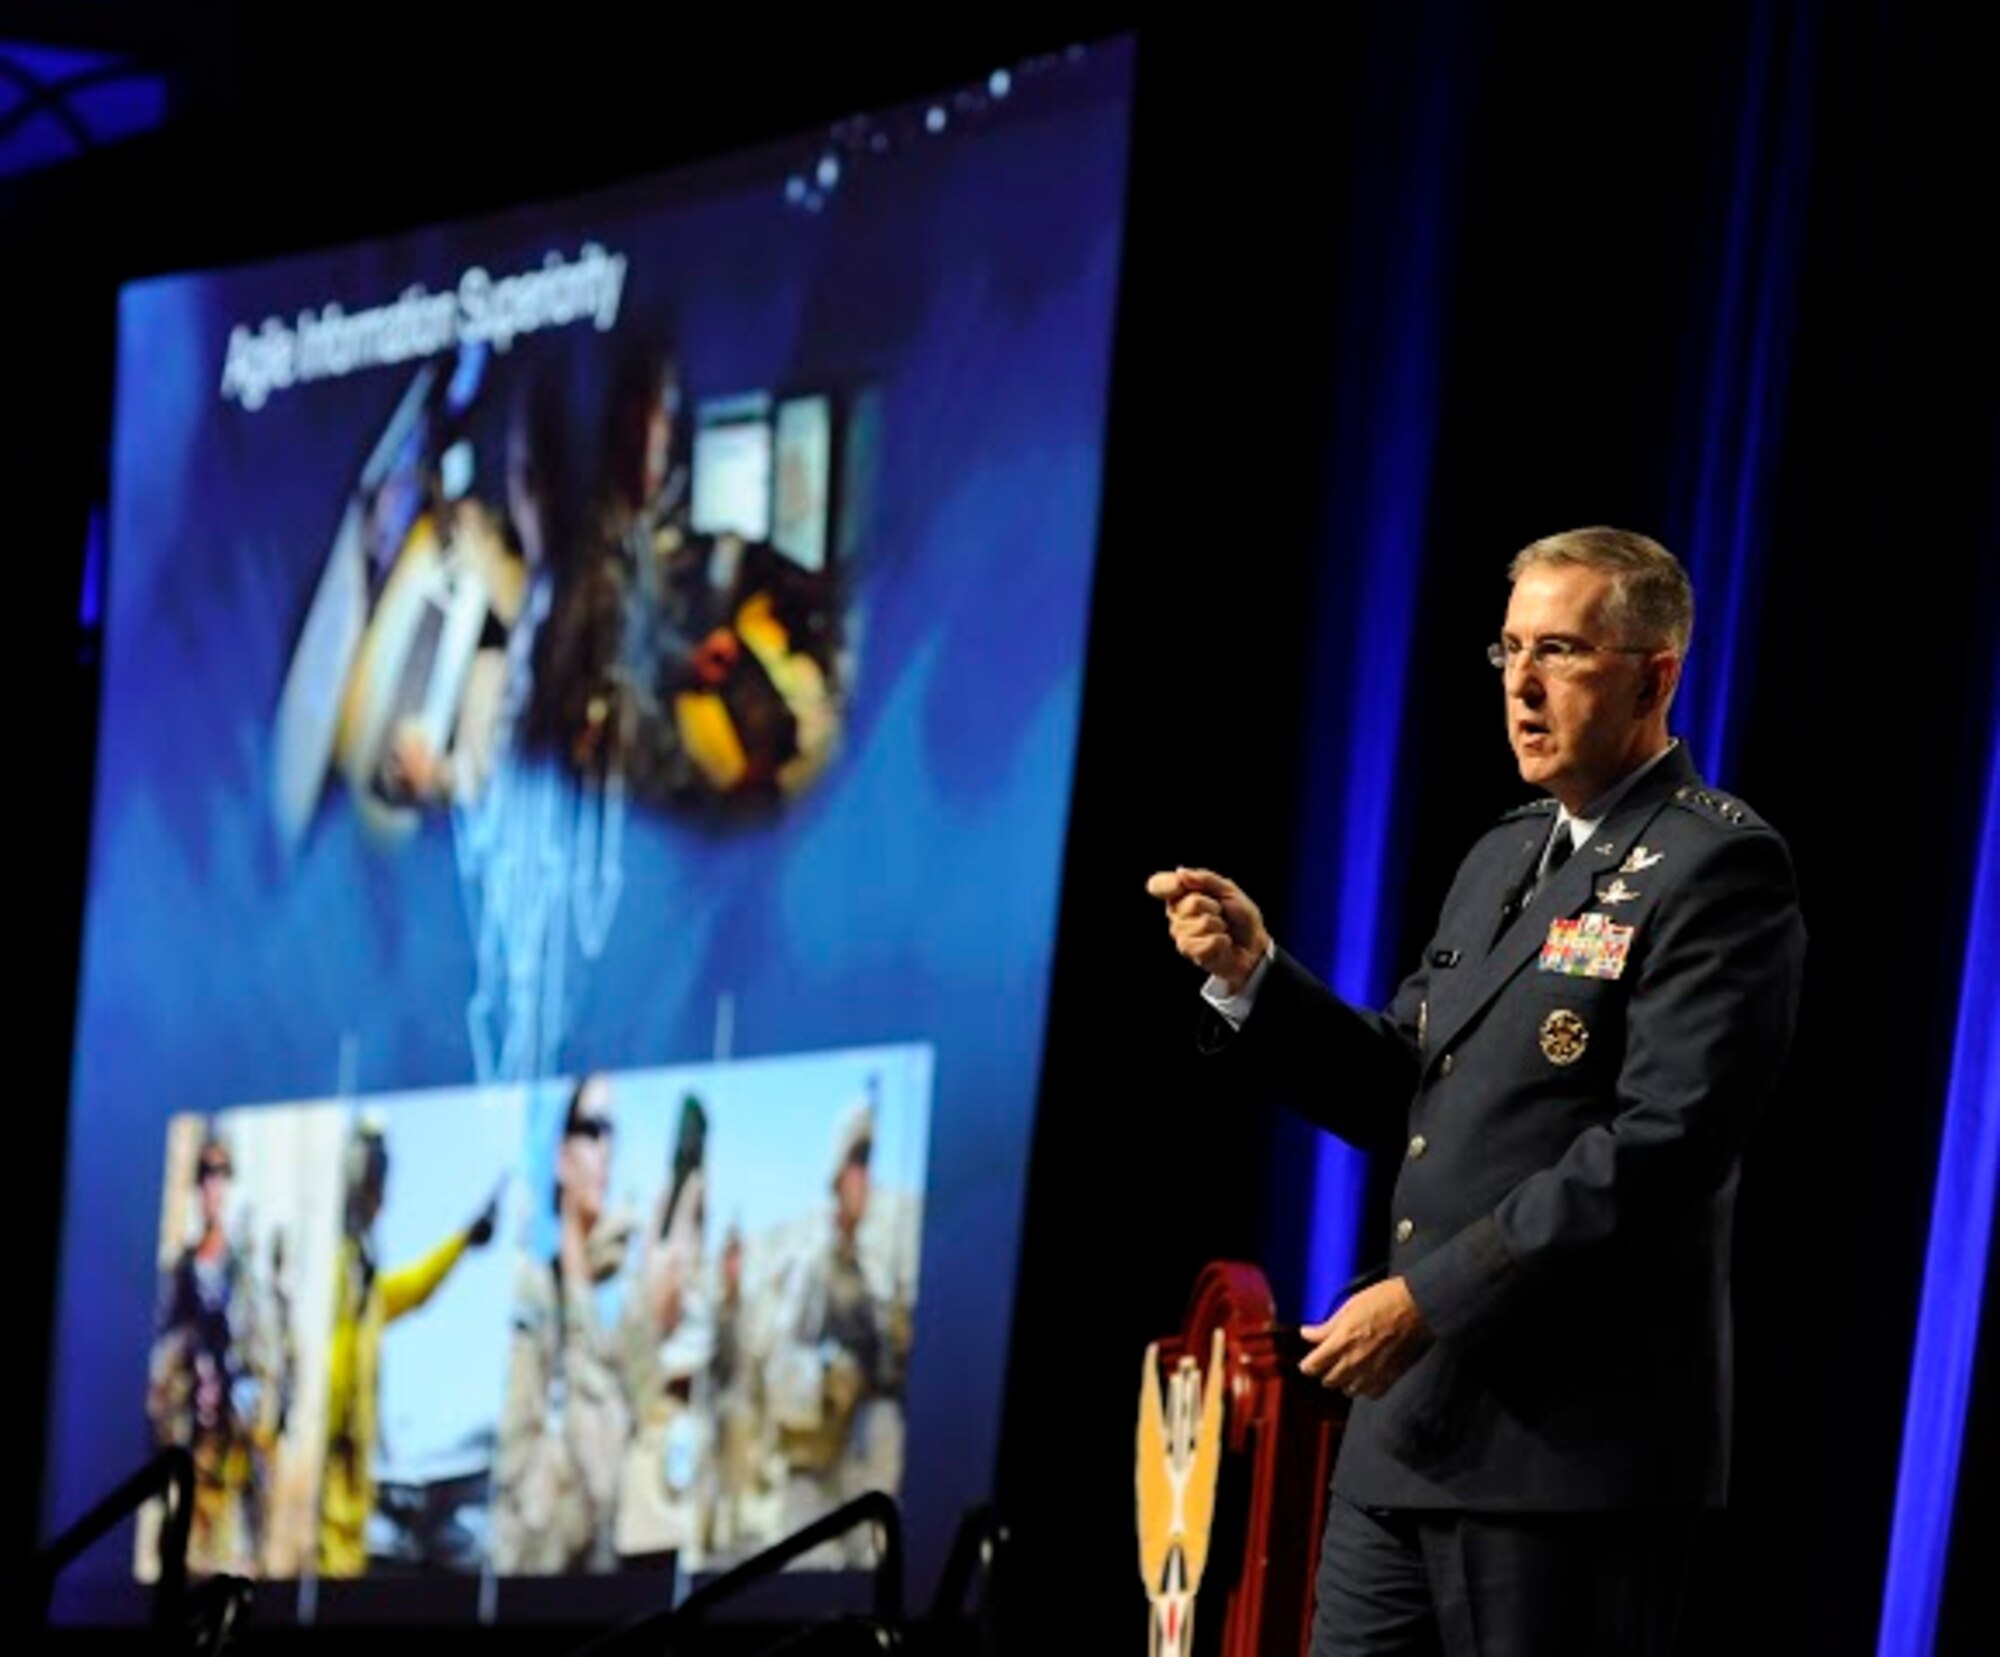 Gen. John Hyten, the Air Force Space Command commander, stresses the importance of agile information superiority during the Air Force Association Air and Space Conference and Technology Exposition in Washington, D.C., Sept. 15, 2015. (Air Force photo/Staff Sgt. Whitney Stanfield)